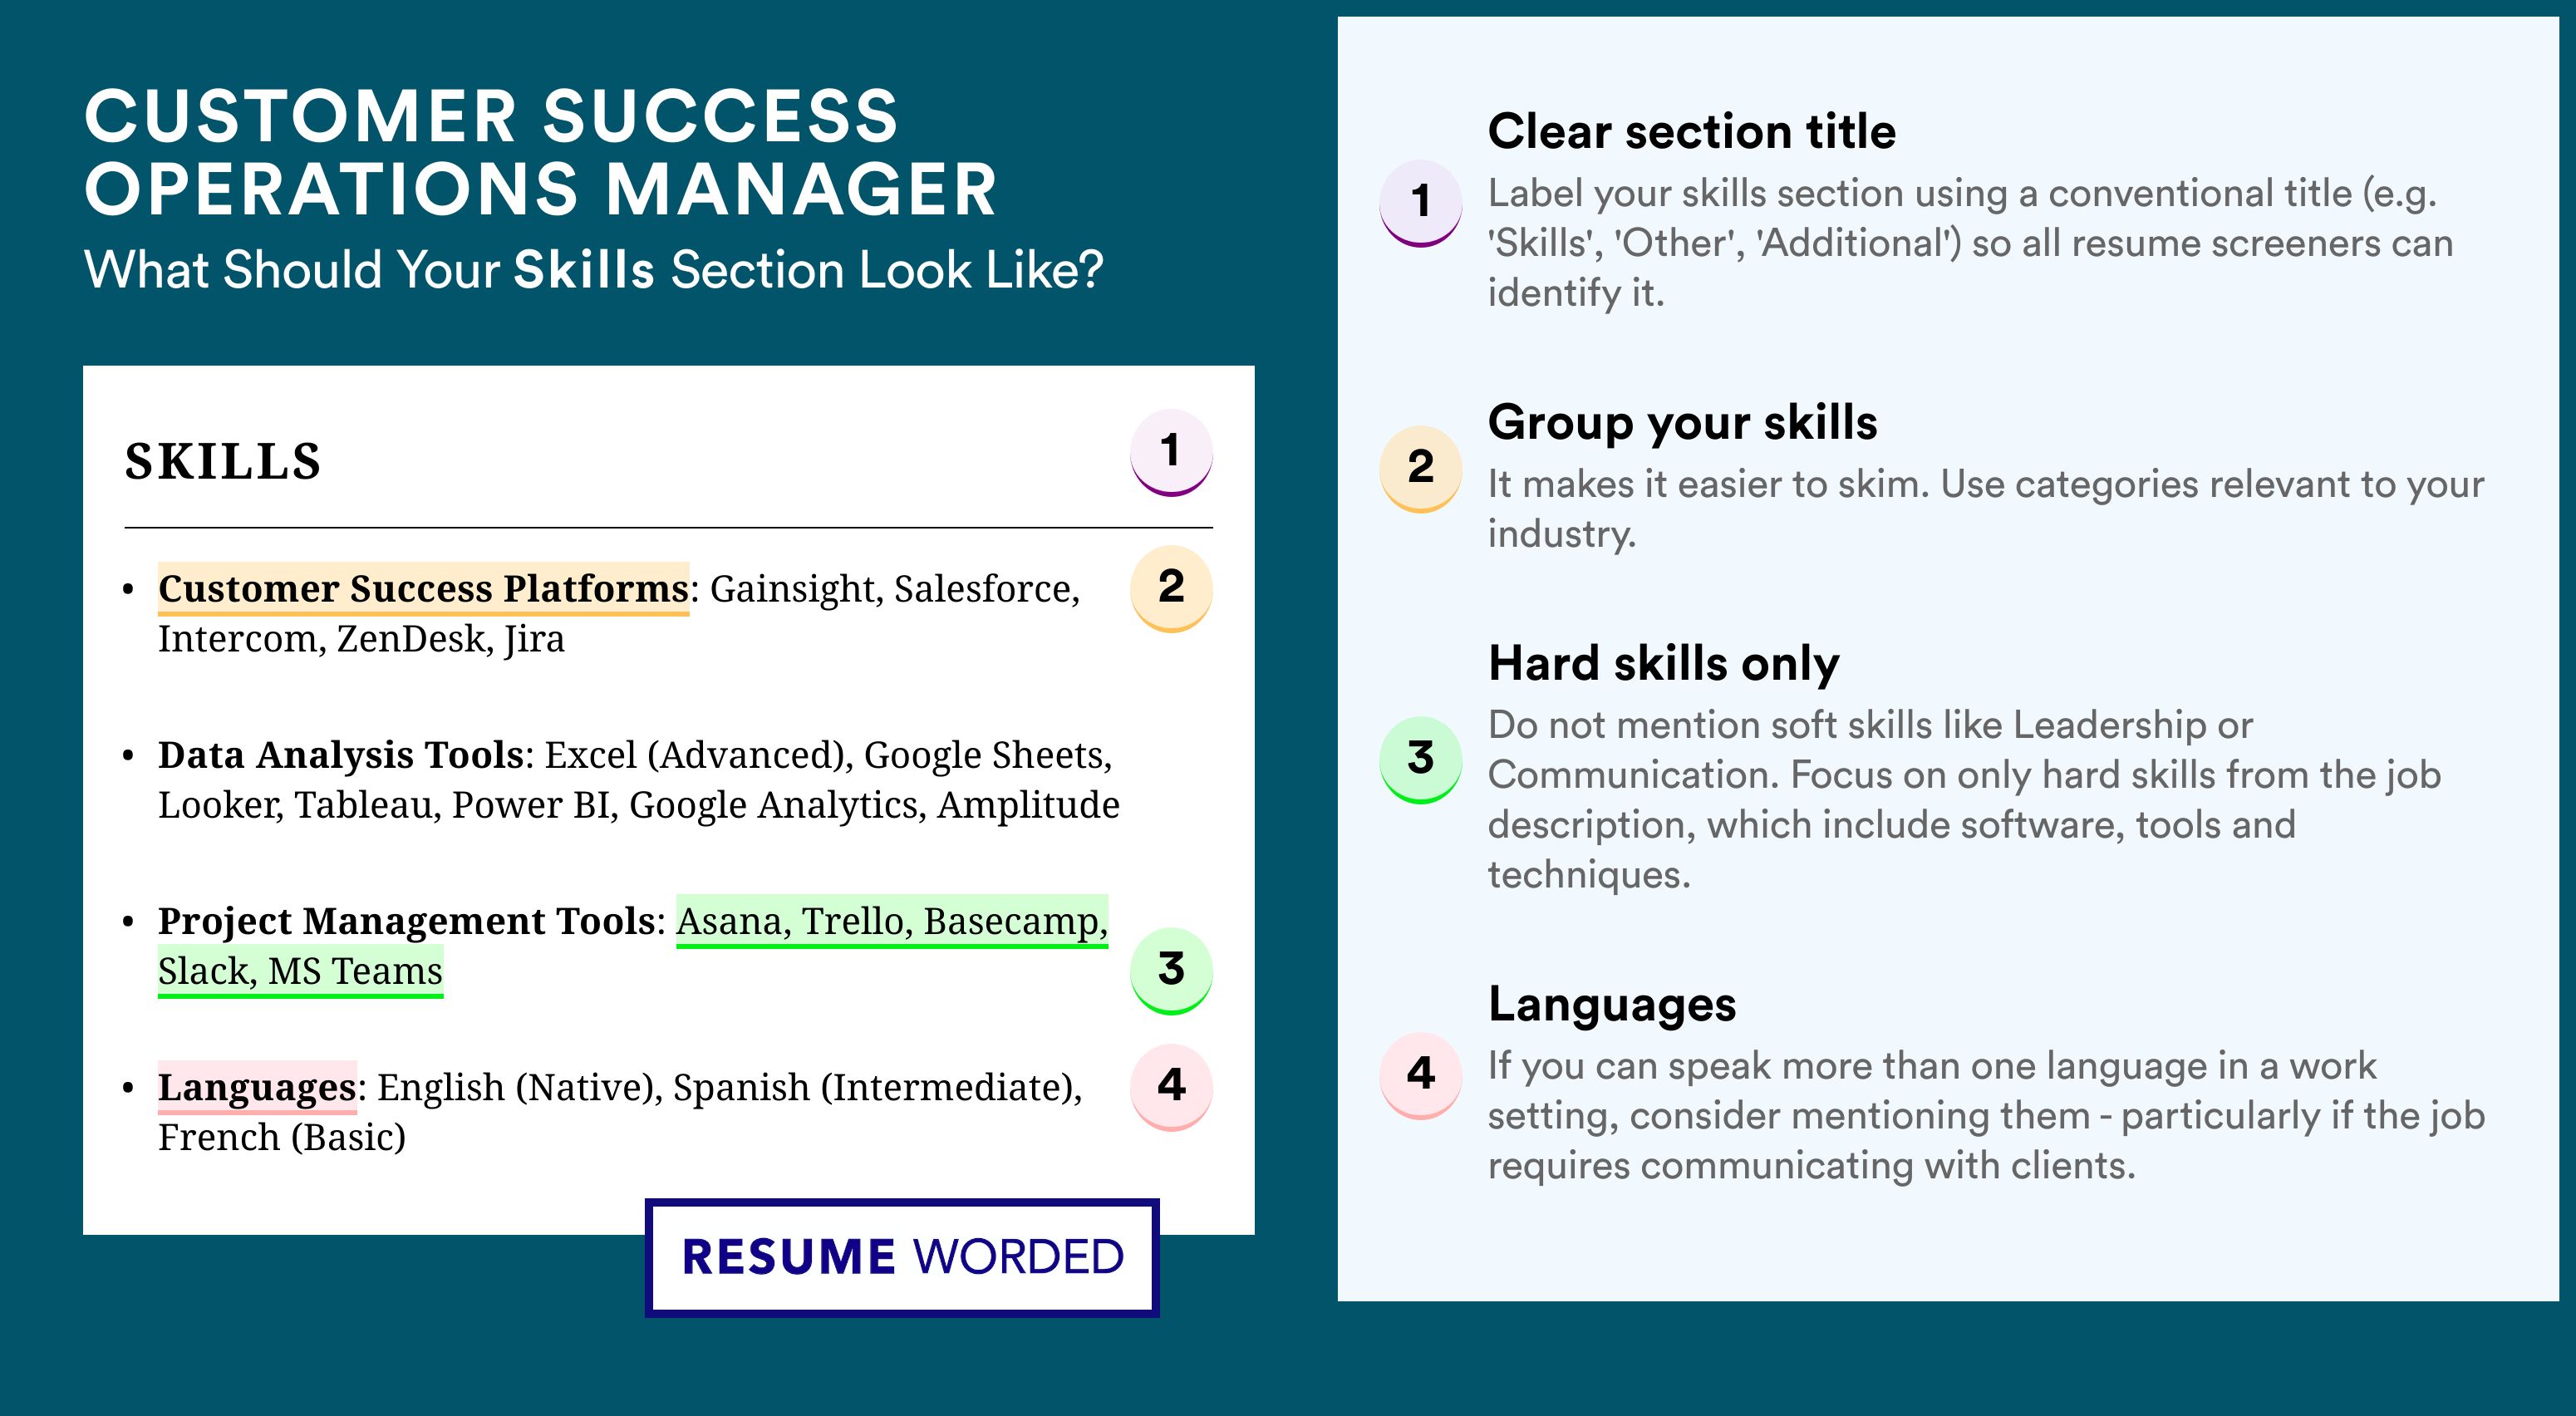 How To Write Your Skills Section - Customer Success Operations Manager Roles